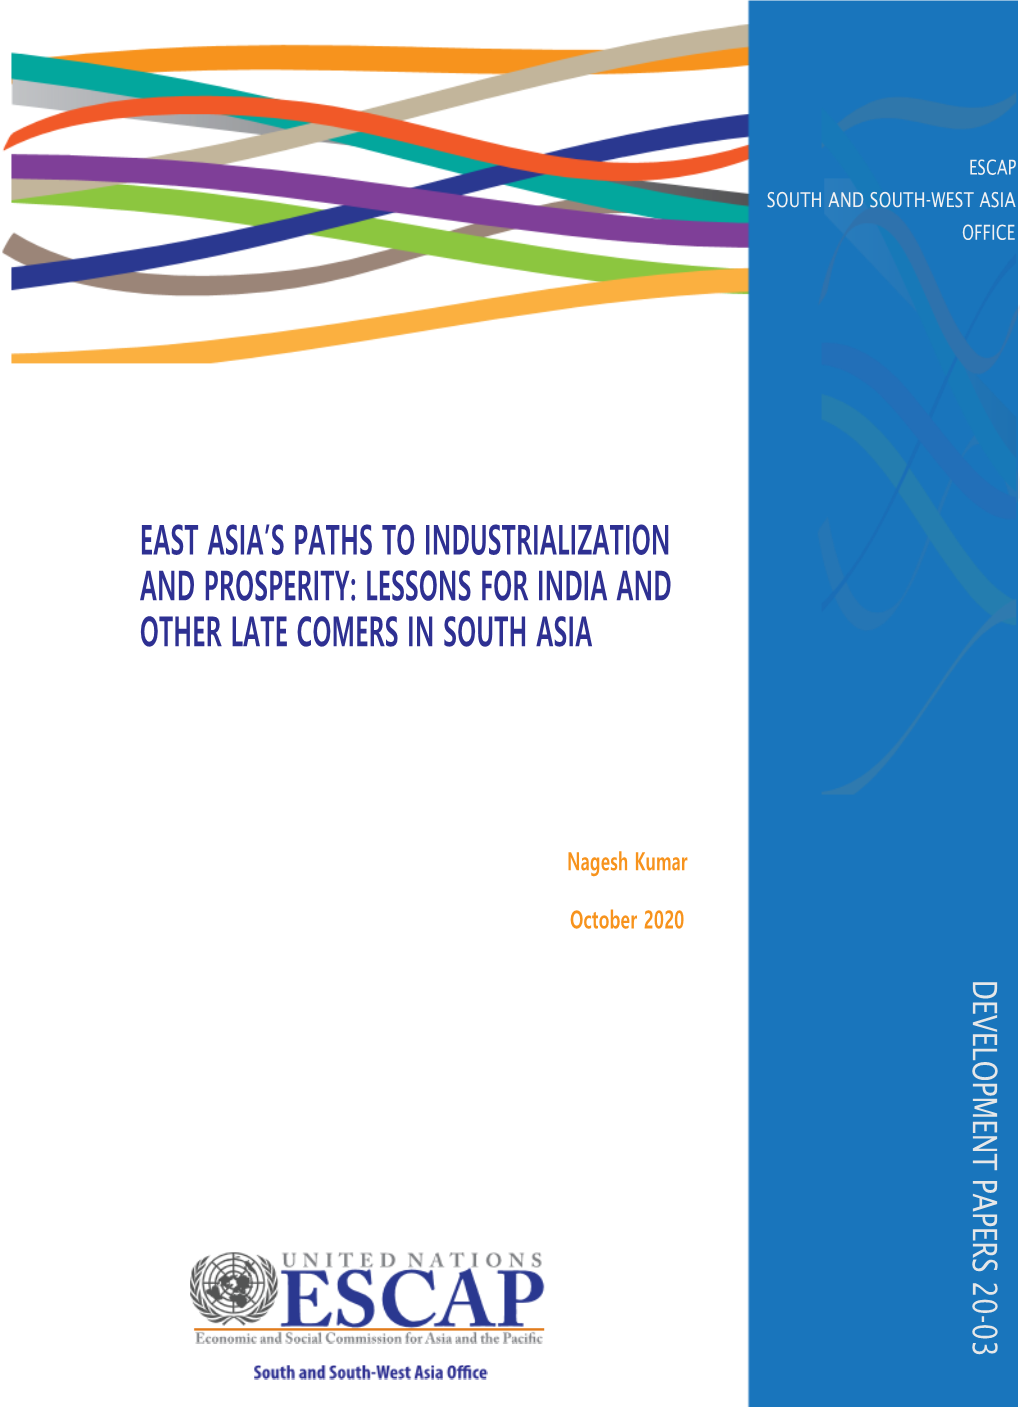 East Asia's Paths to Industrialization and Prosperity: Lessons for India